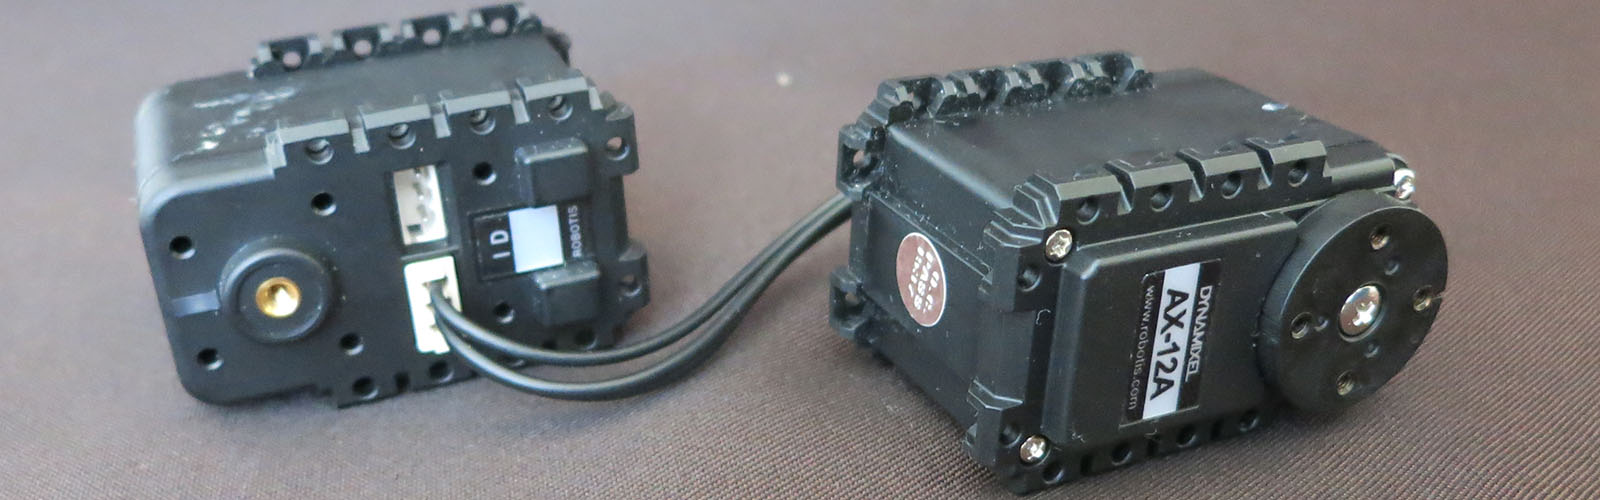 Wrangling RC Servos Becoming A Hassle? Try Serial Bus Servos